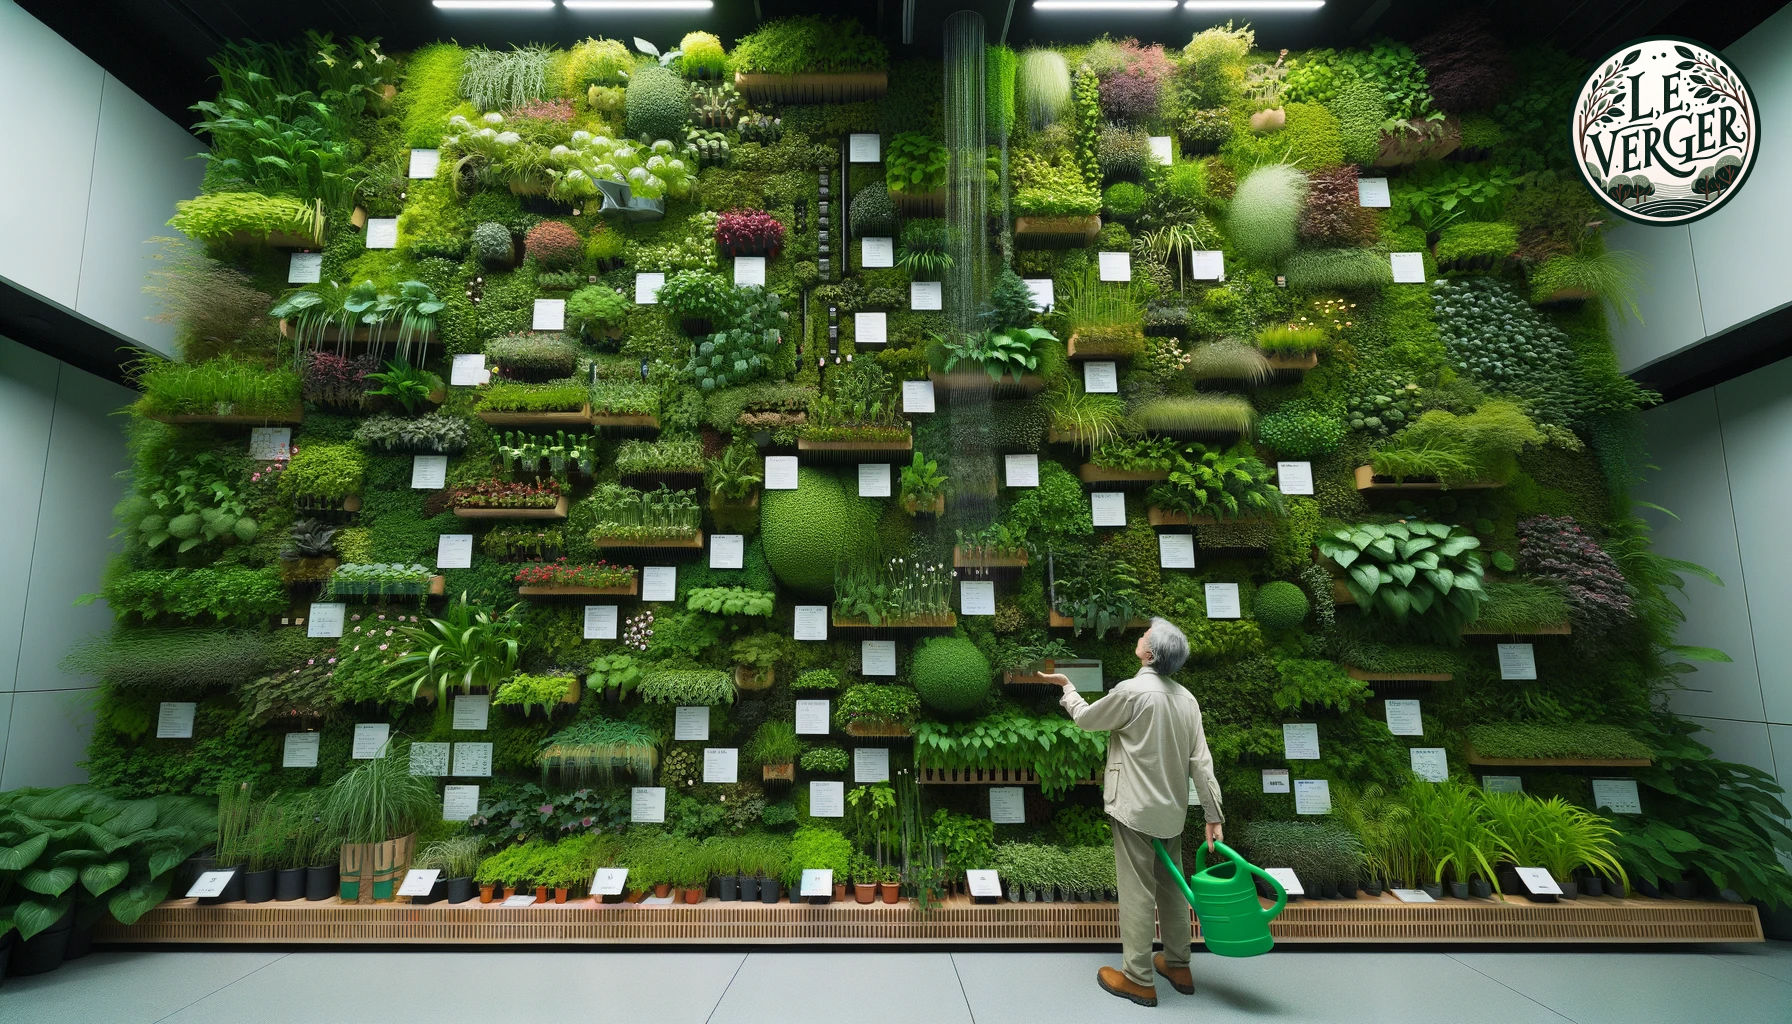 Photo: An indoor setting with a green wall packed with a diverse range of plants. A gardener, with a watering can in hand, admires the vertical garden. Small labels identify various plant species and offer care tips.